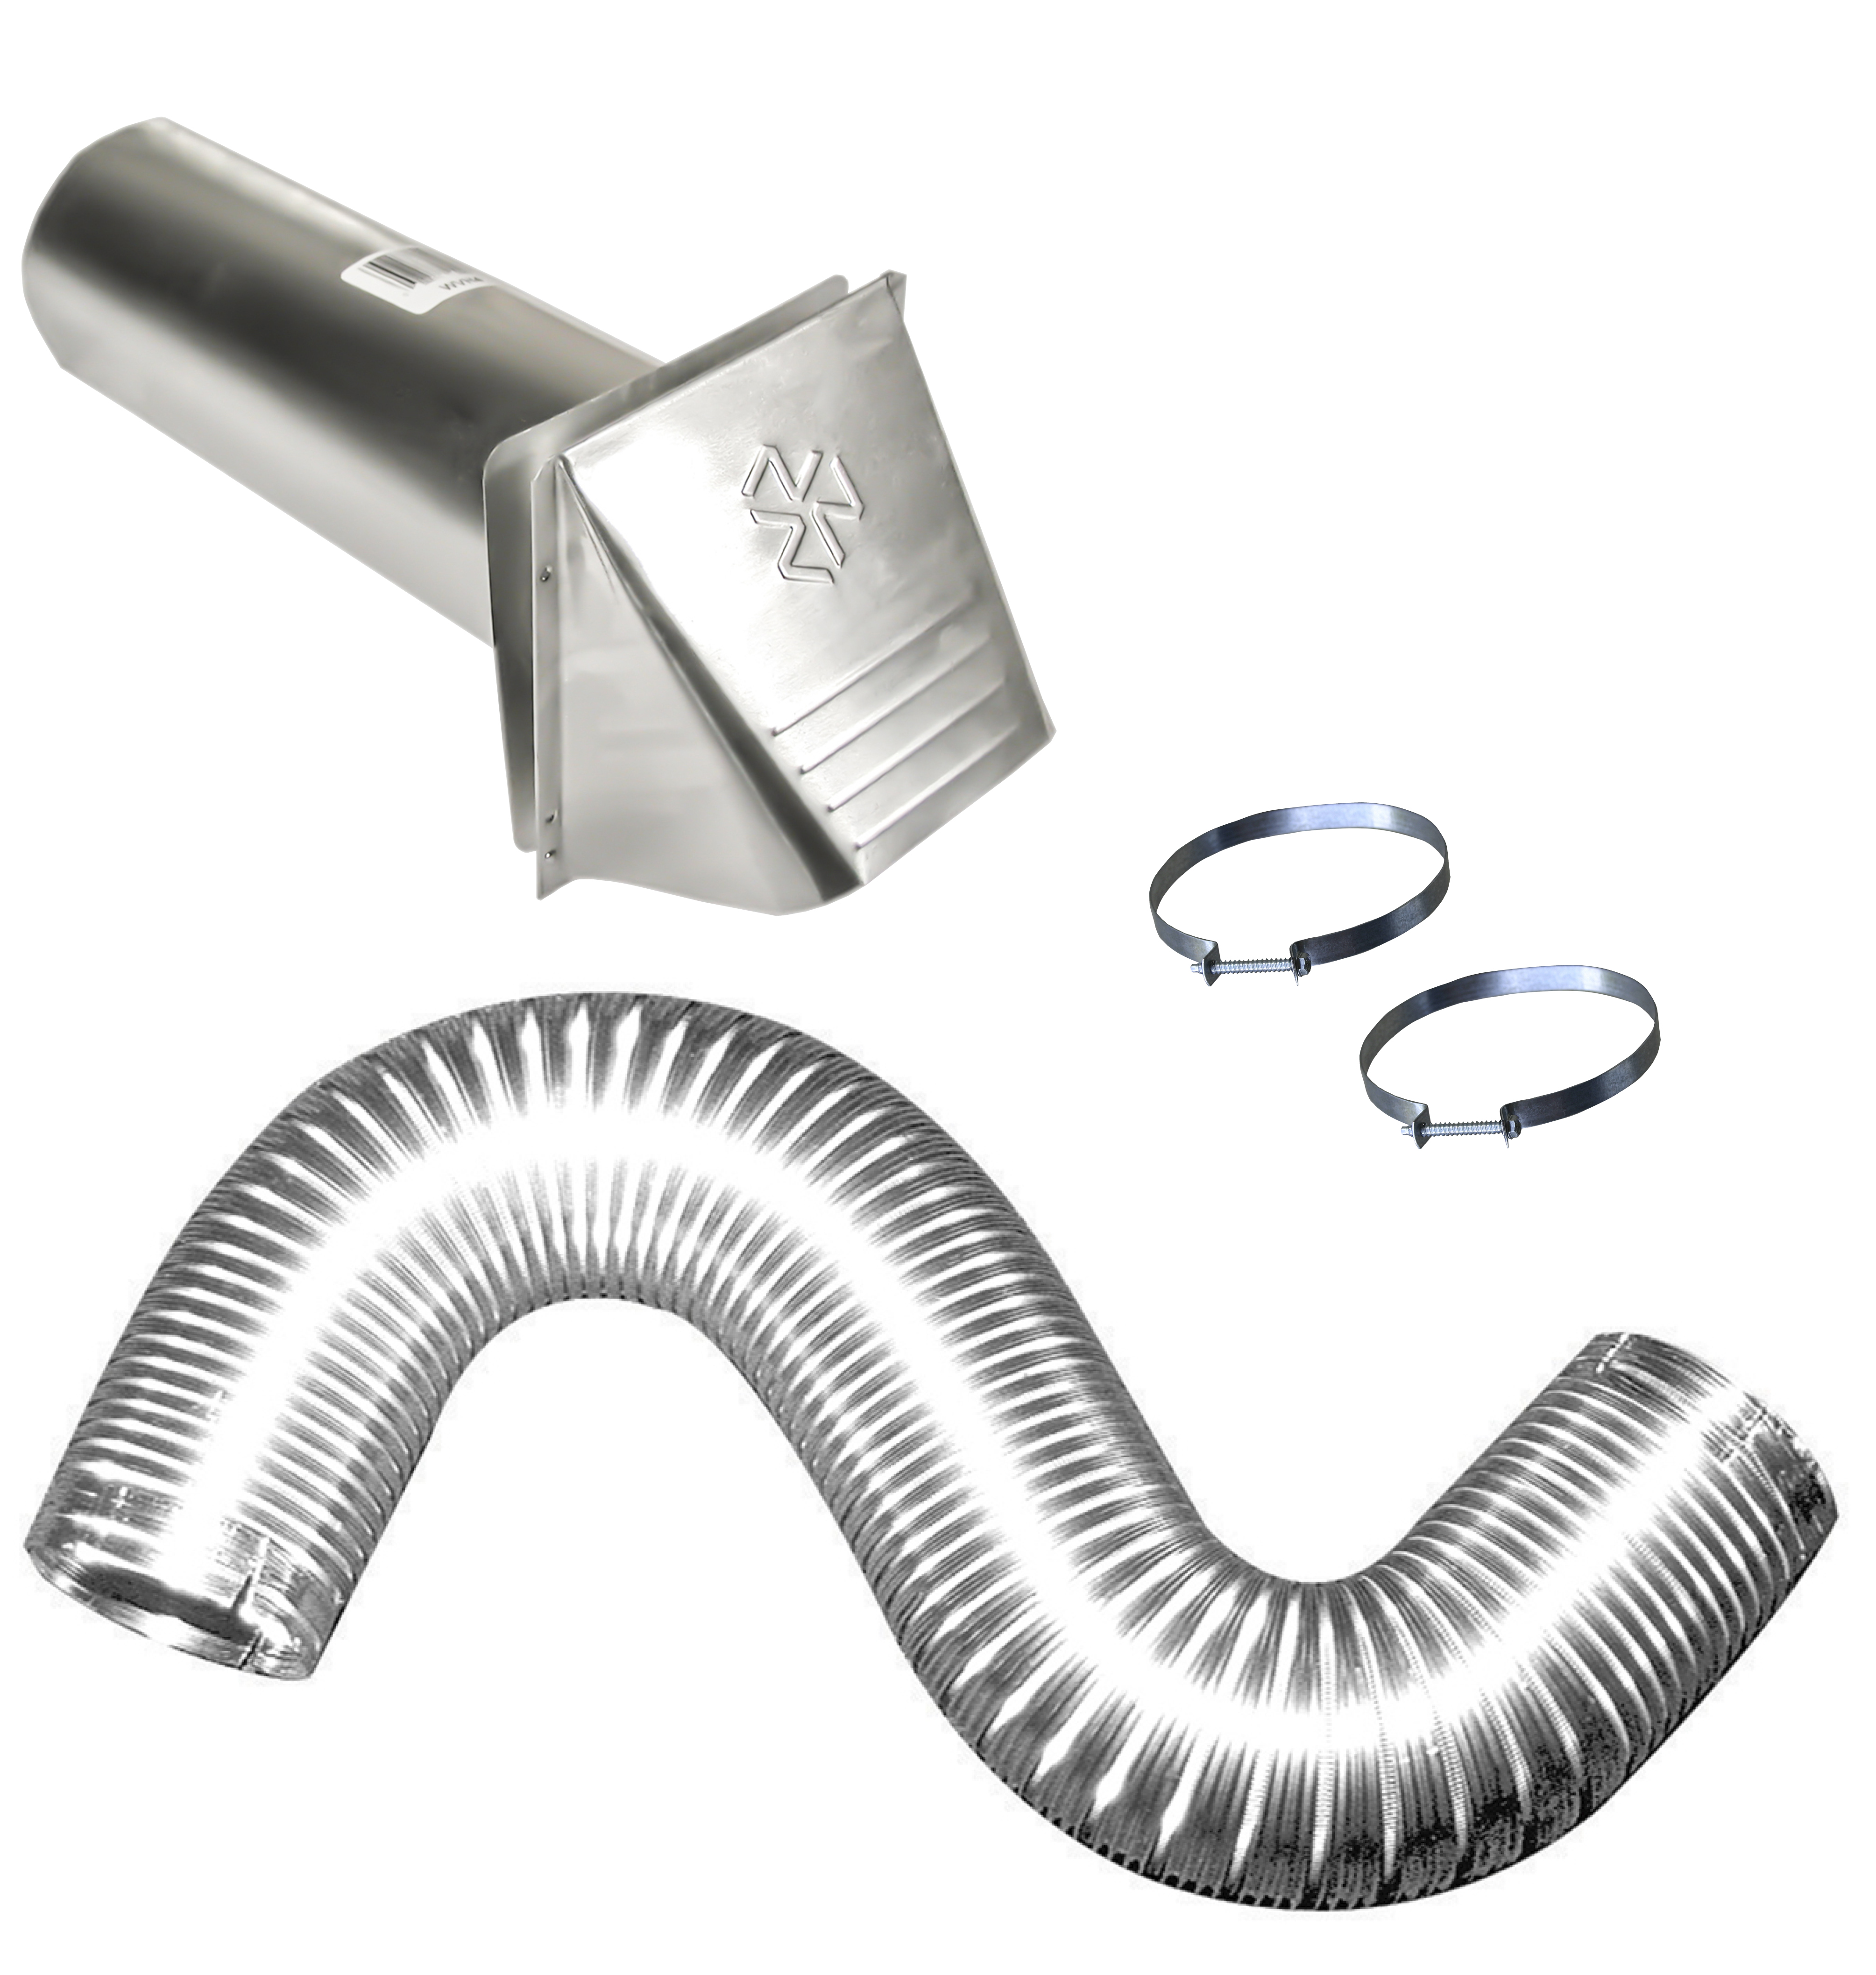 Builders Best 080117 Universal Dryer Complete Vent Kit Venting Elbow Swivel Cuff